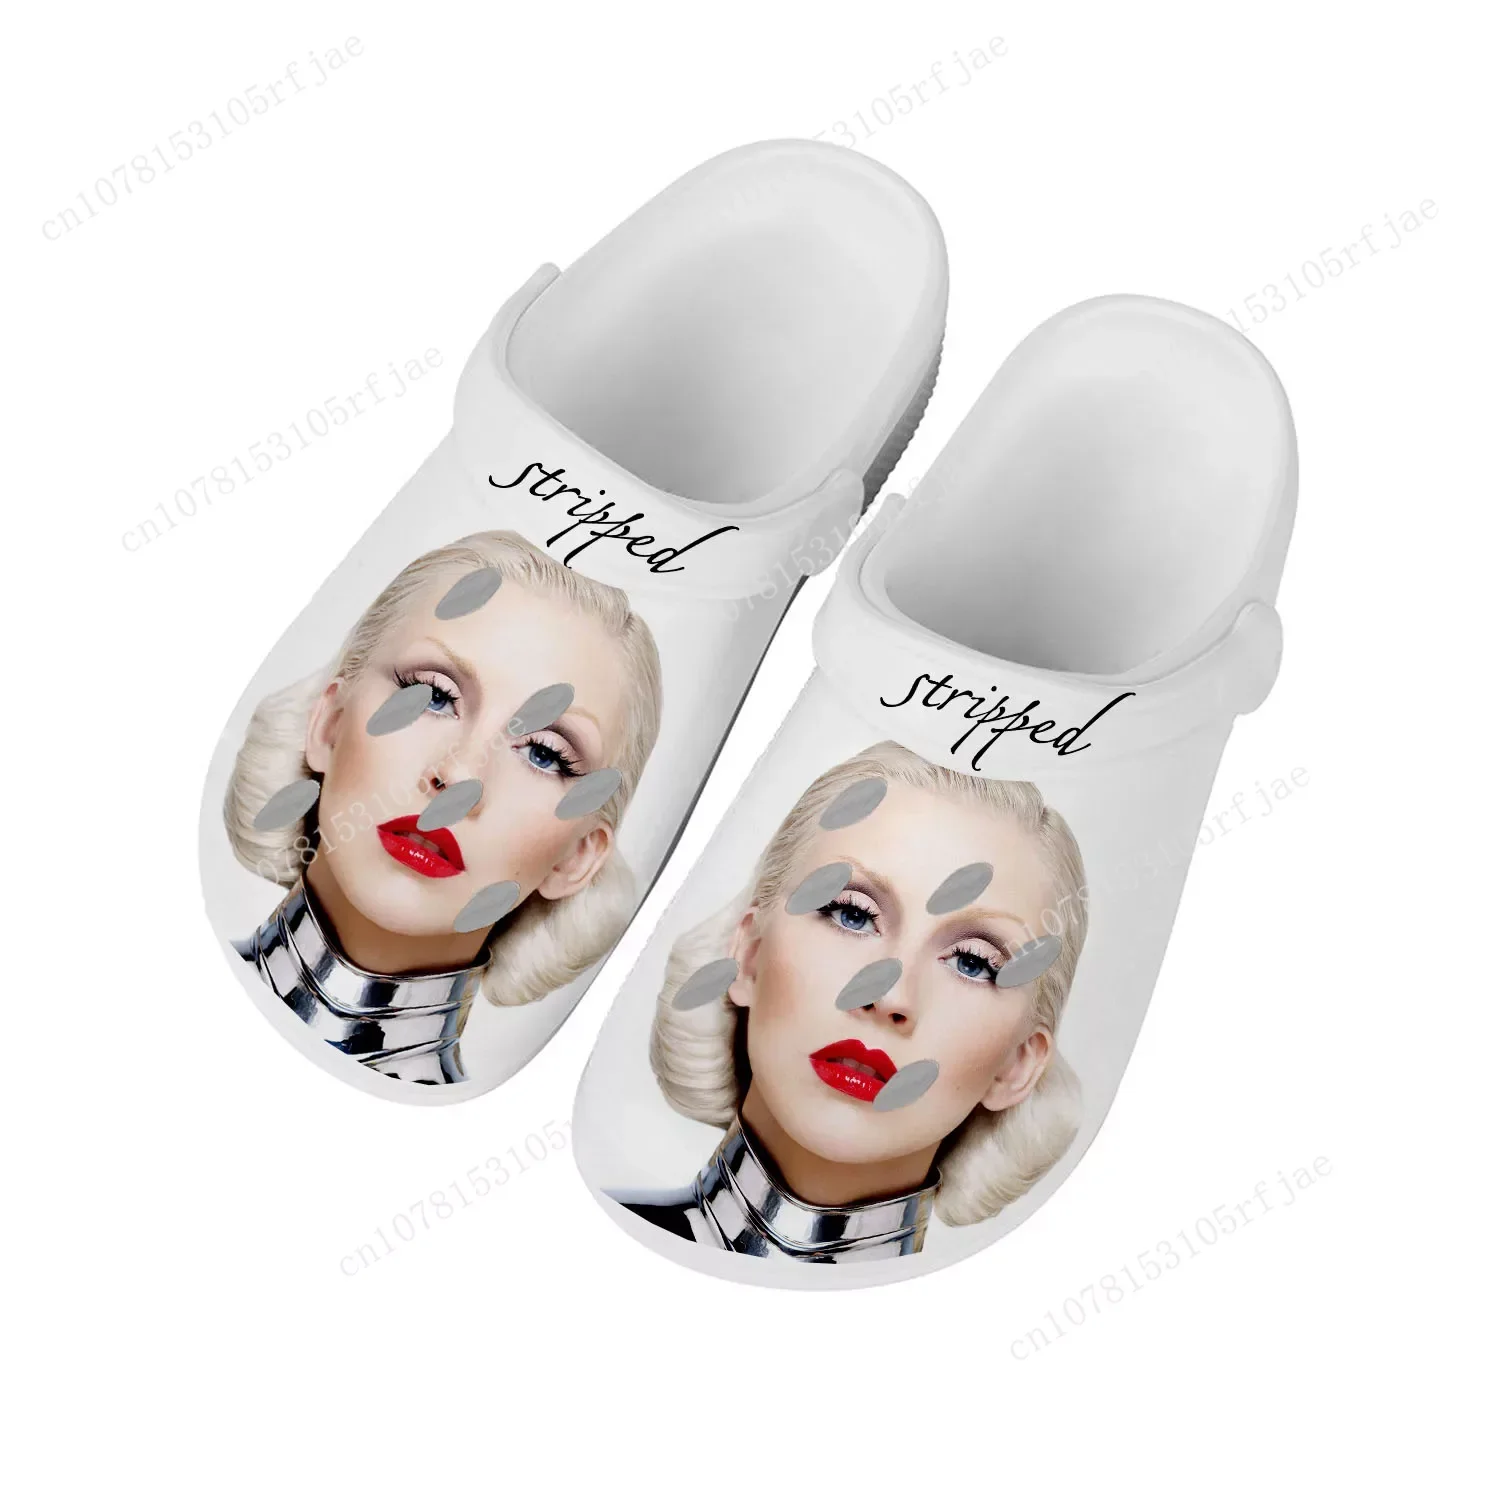 

Christina Aguilera Home Clog Mens Women Youth Boy Girl Sandals Shoes Garden Bespoke Customized Breathable Shoe Hole Slippers